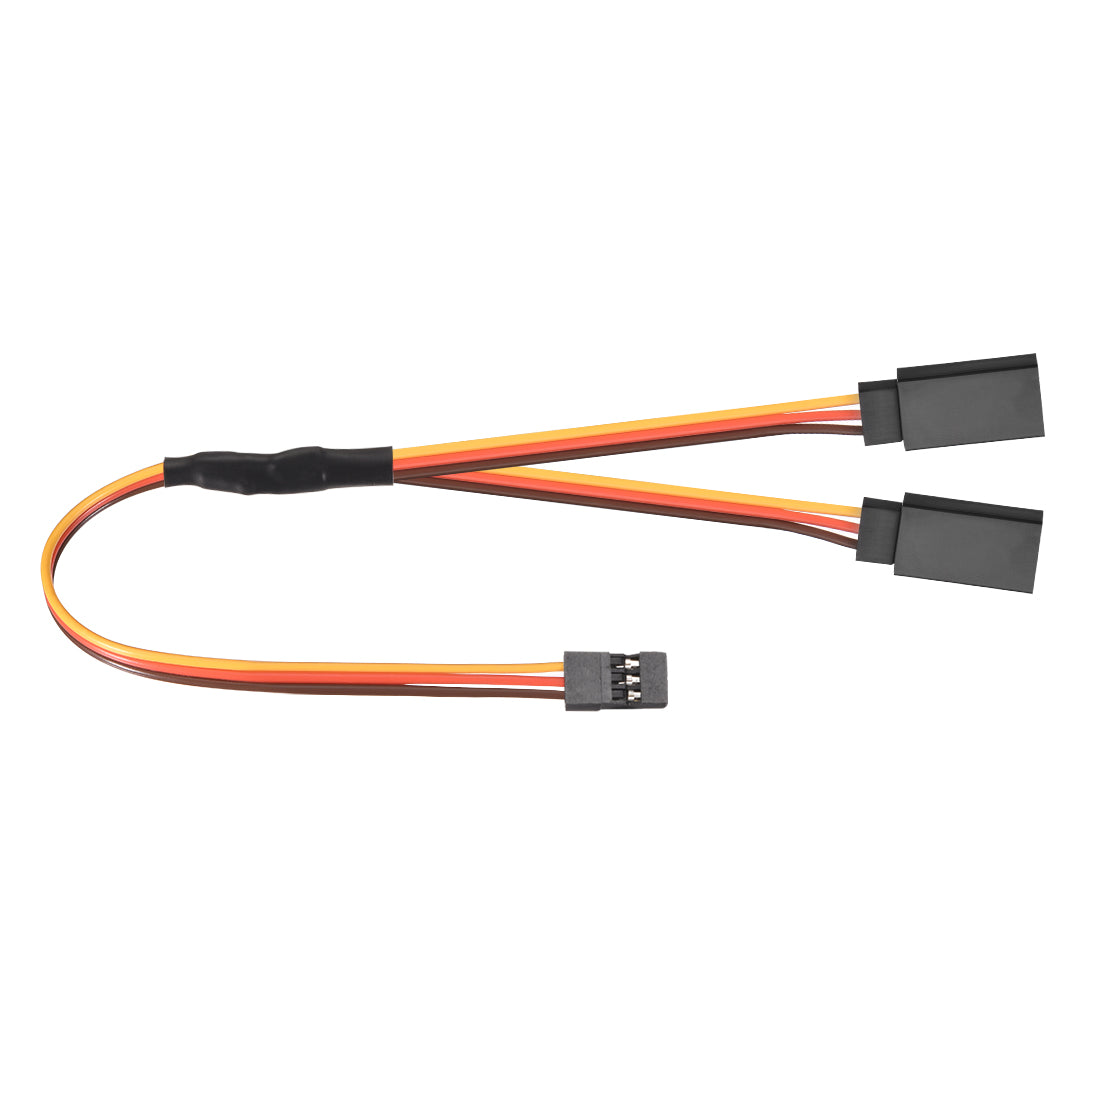 uxcell Uxcell 20cm Y Servo Extension Cable Remote Control Racing Part 1 Female to 2 Male Lead Cord